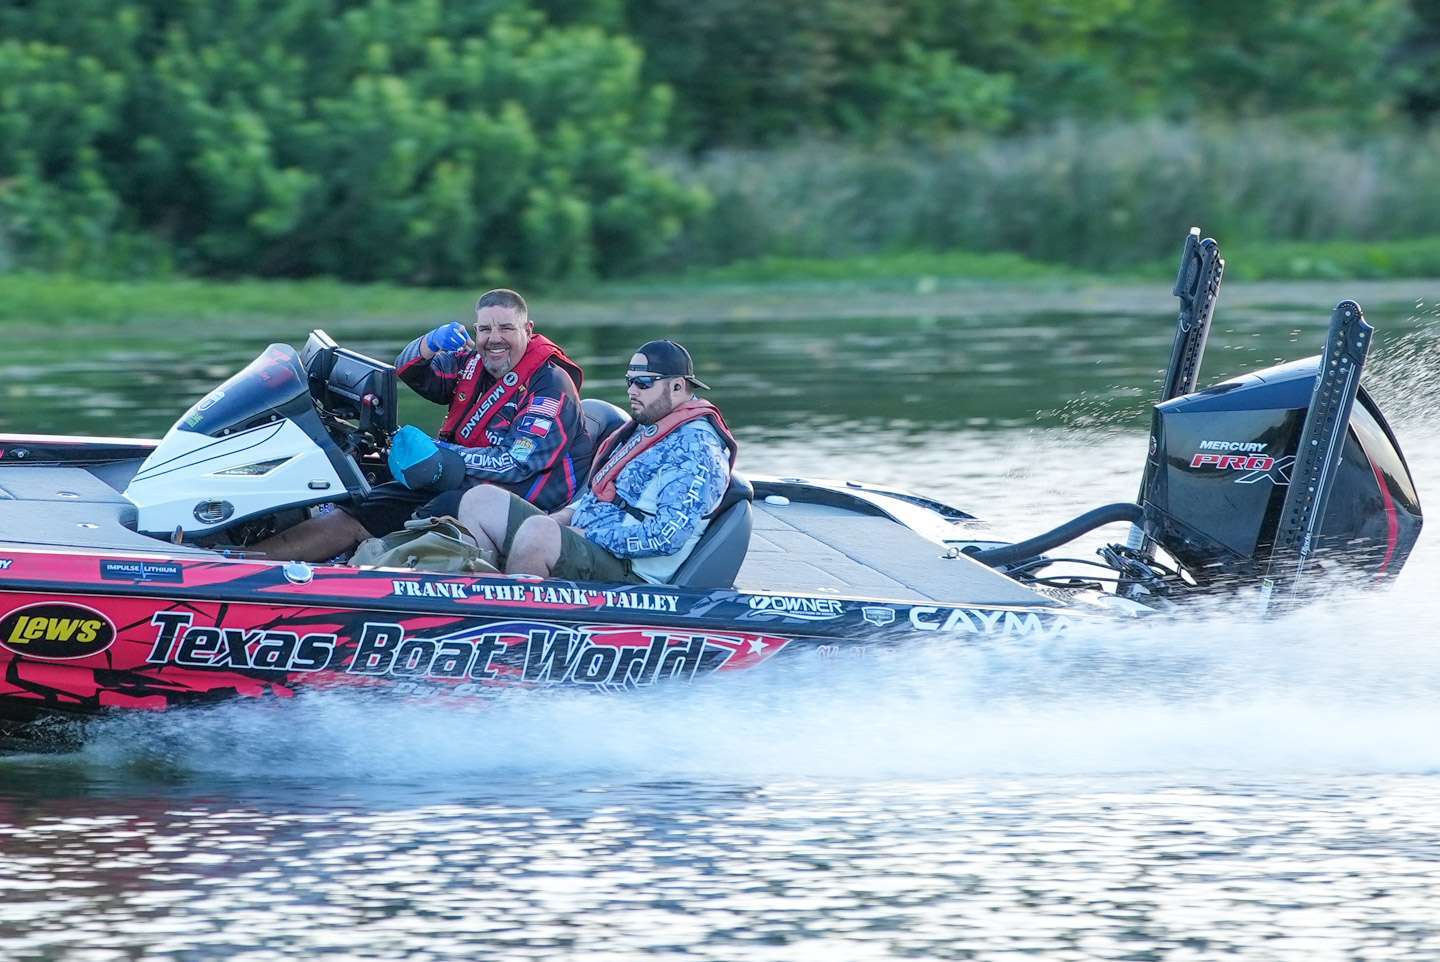 <h4>Frank Talley</h4>
Temple, Texas<br>
Qualified via the 2021 Bassmaster Elite Series<br>
